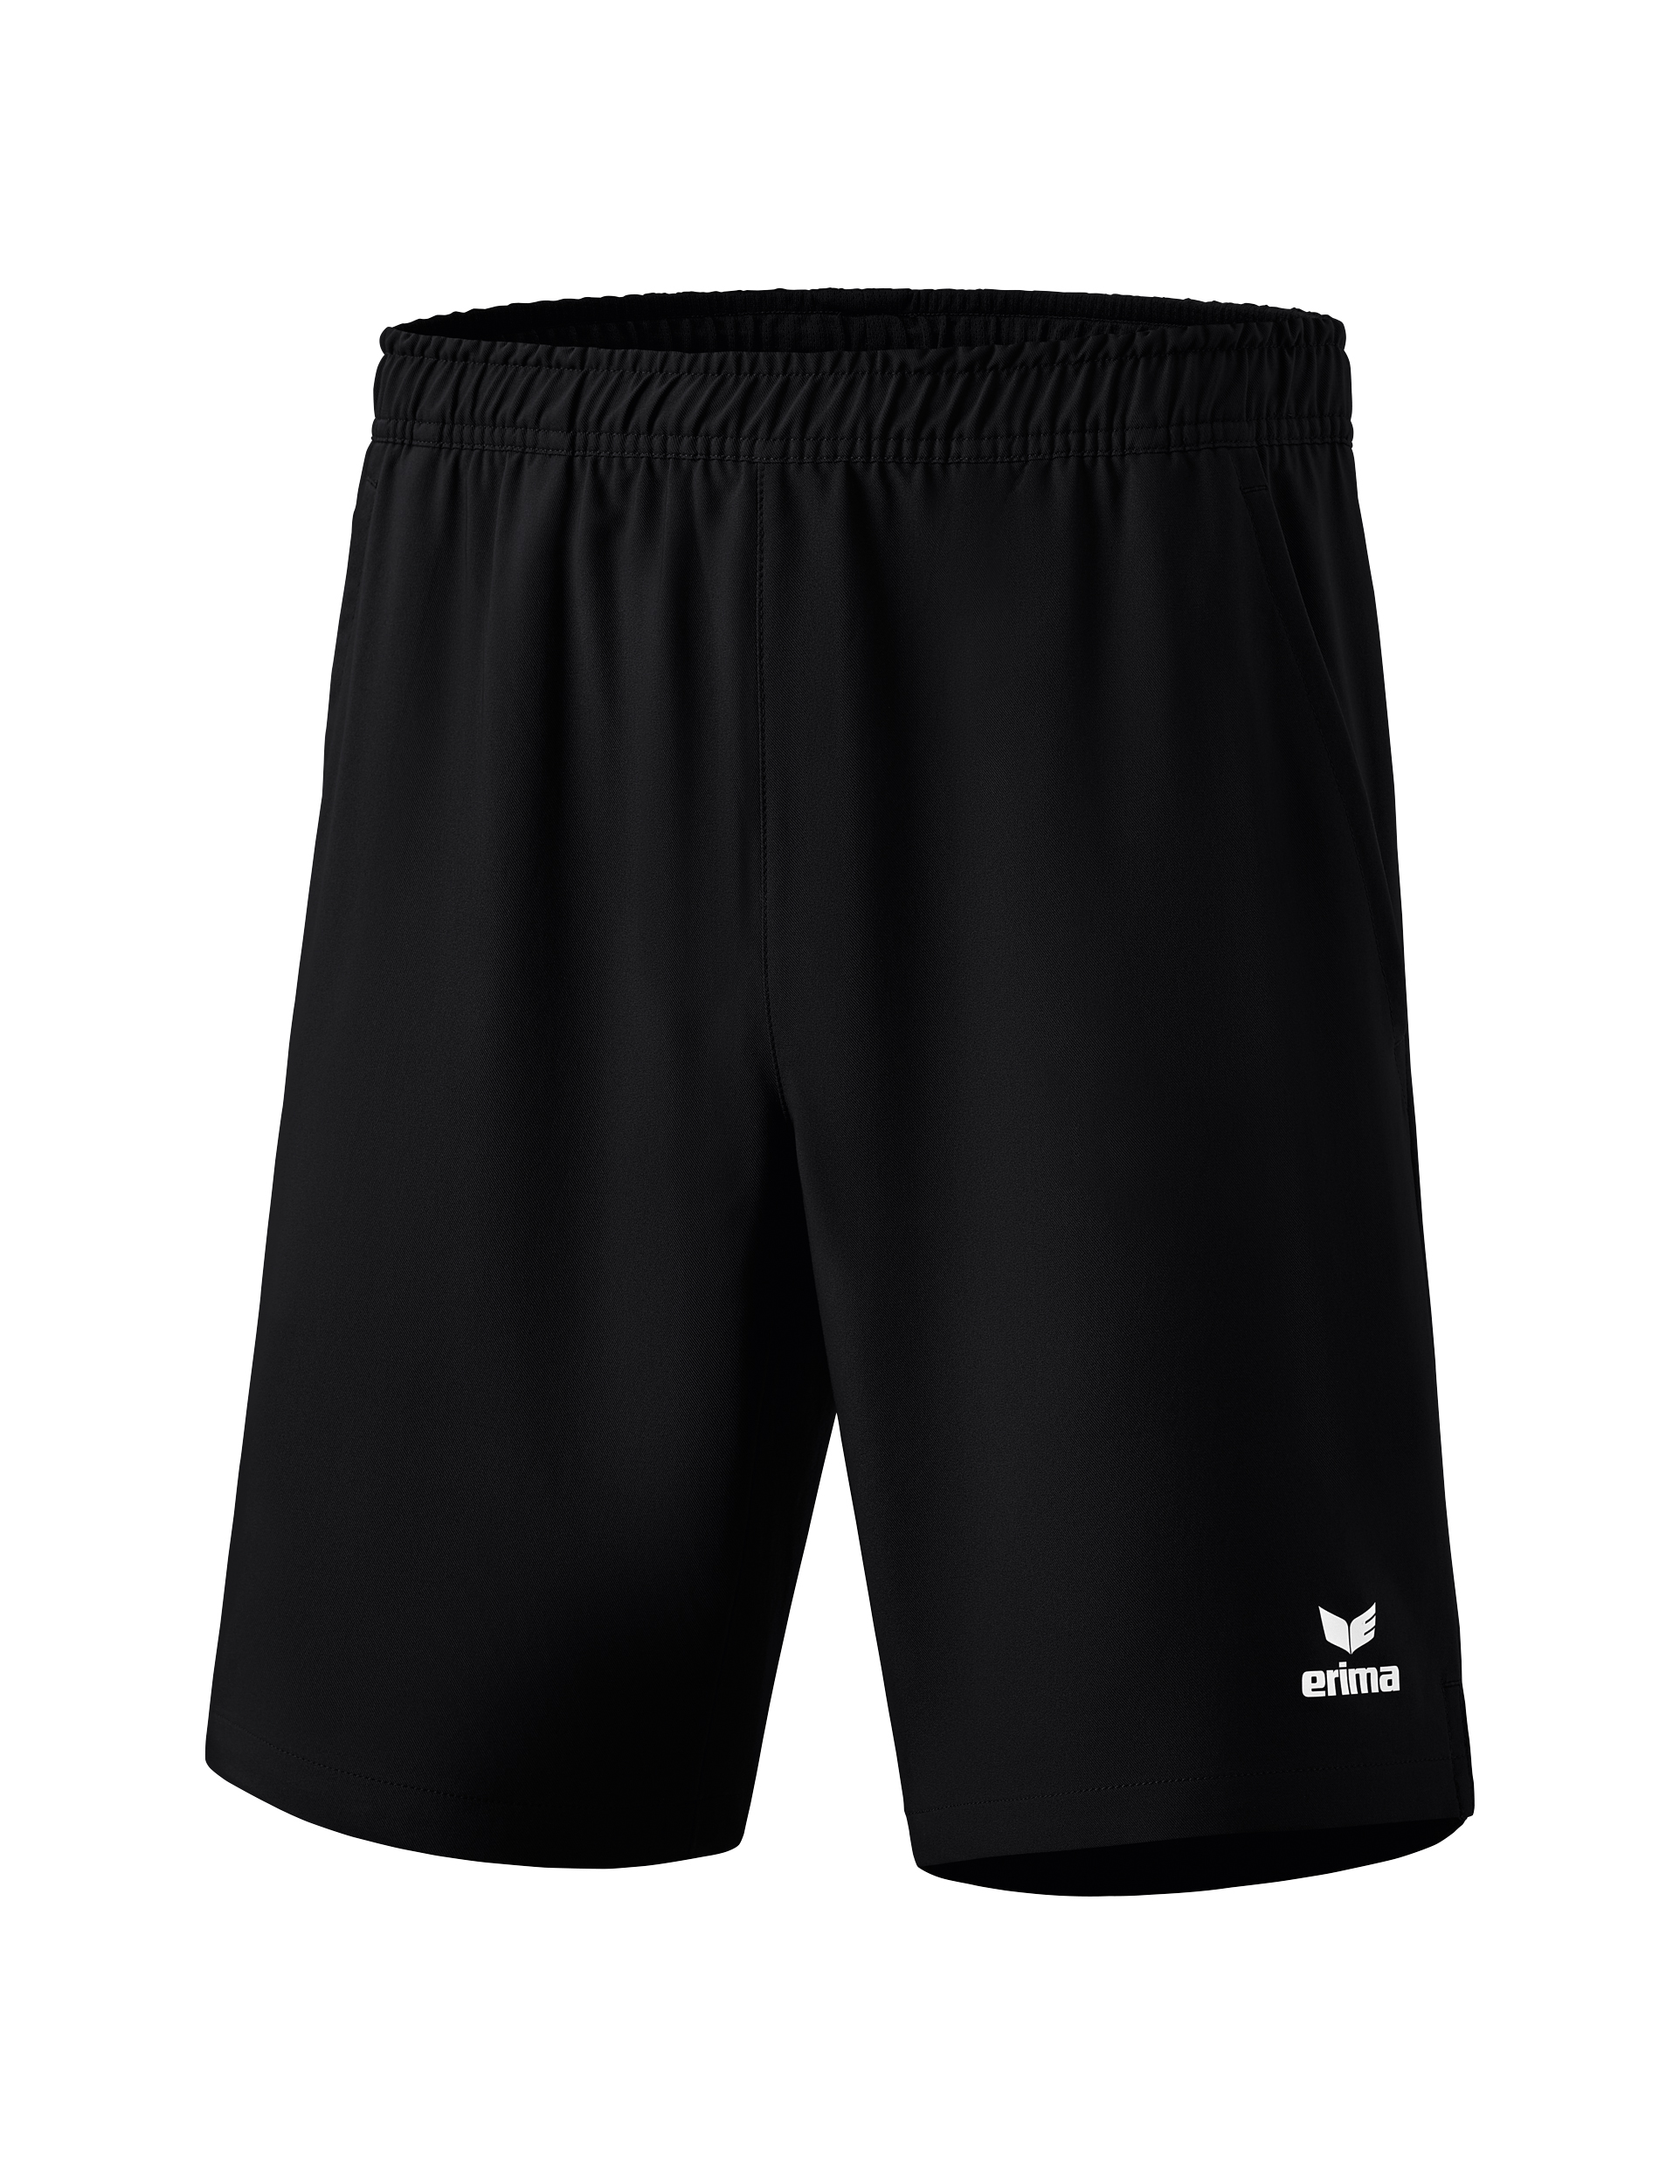 Tennis shorts without inner slip